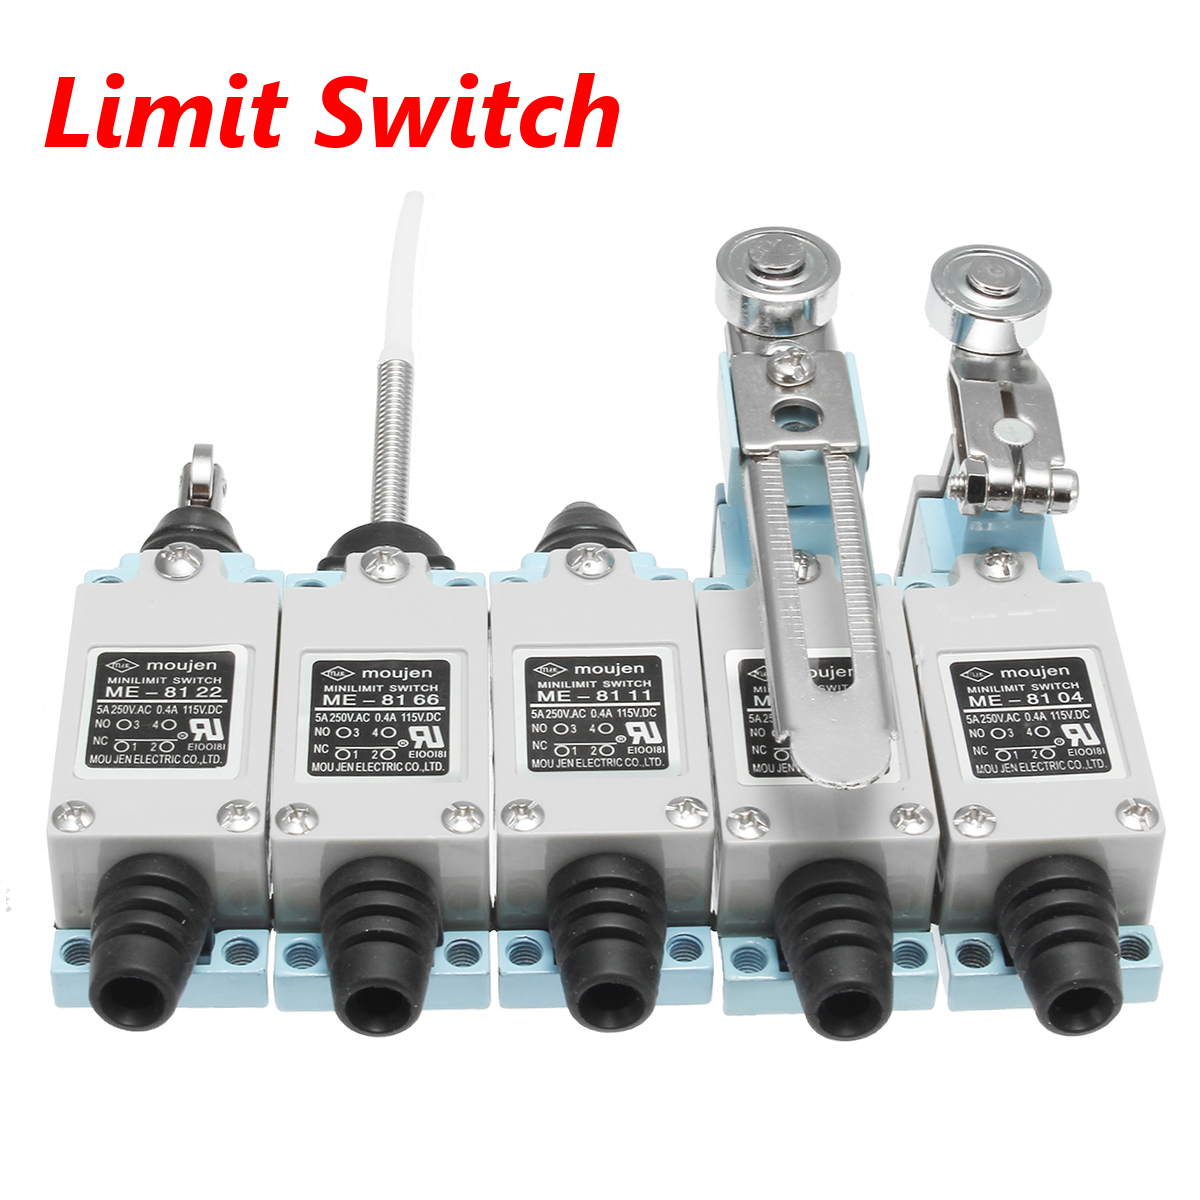 10-Types-250VAC-Limit-Switch-IP65-Adjustable-Actuator-Roller-Arm-Rod-Spring-Coil-Endstop-Switch-1297617-1